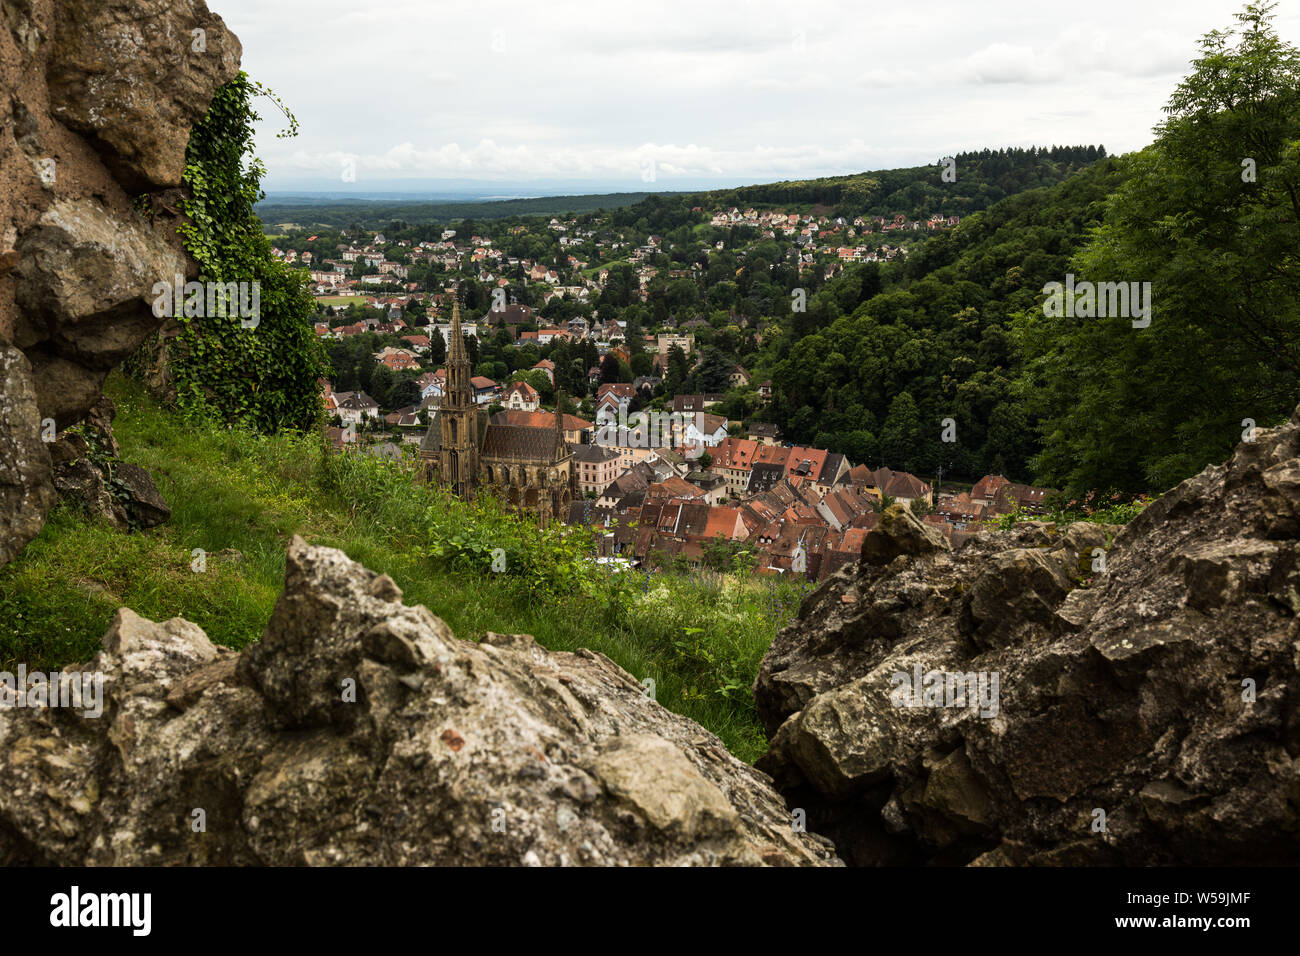 Overlooking the quaint Alsatian city of Thann, France, including the medieval St. Theobald's Church, from the ruins of Engelbourg Castle. Stock Photo